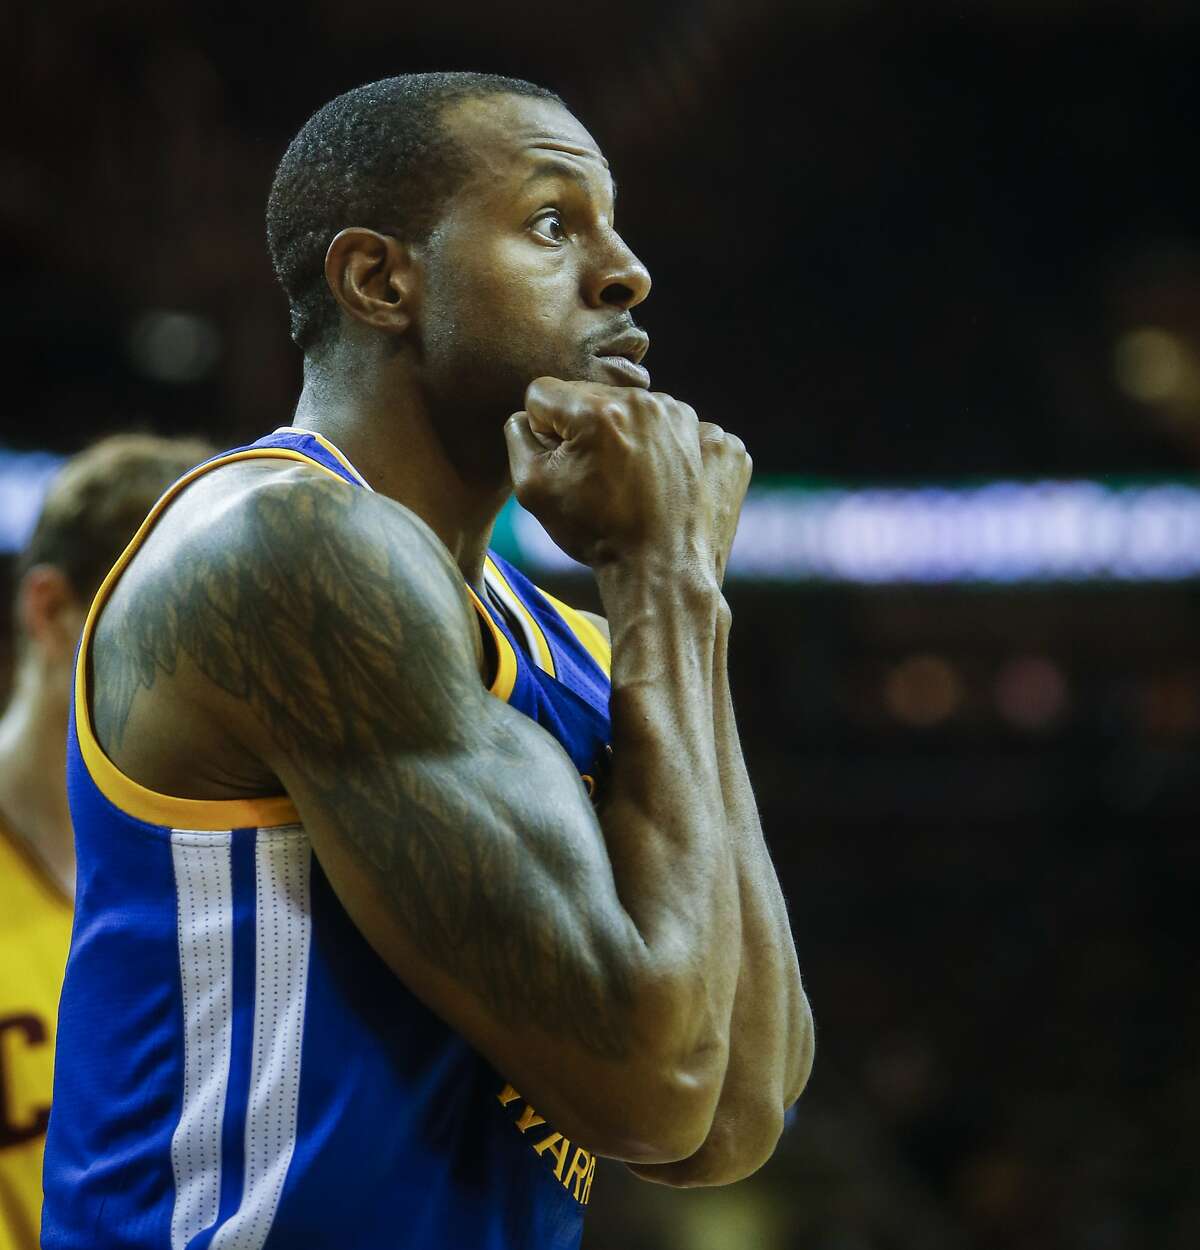 Golden State Warriors' Andre Iguodala reacts to a call in the third period during Game 4 of The NBA Finals between the Golden State Warriors and Cleveland Cavaliers at The Quicken Loans Arena on Thursday, June 11, 2015 in Cleveland, Ohio.